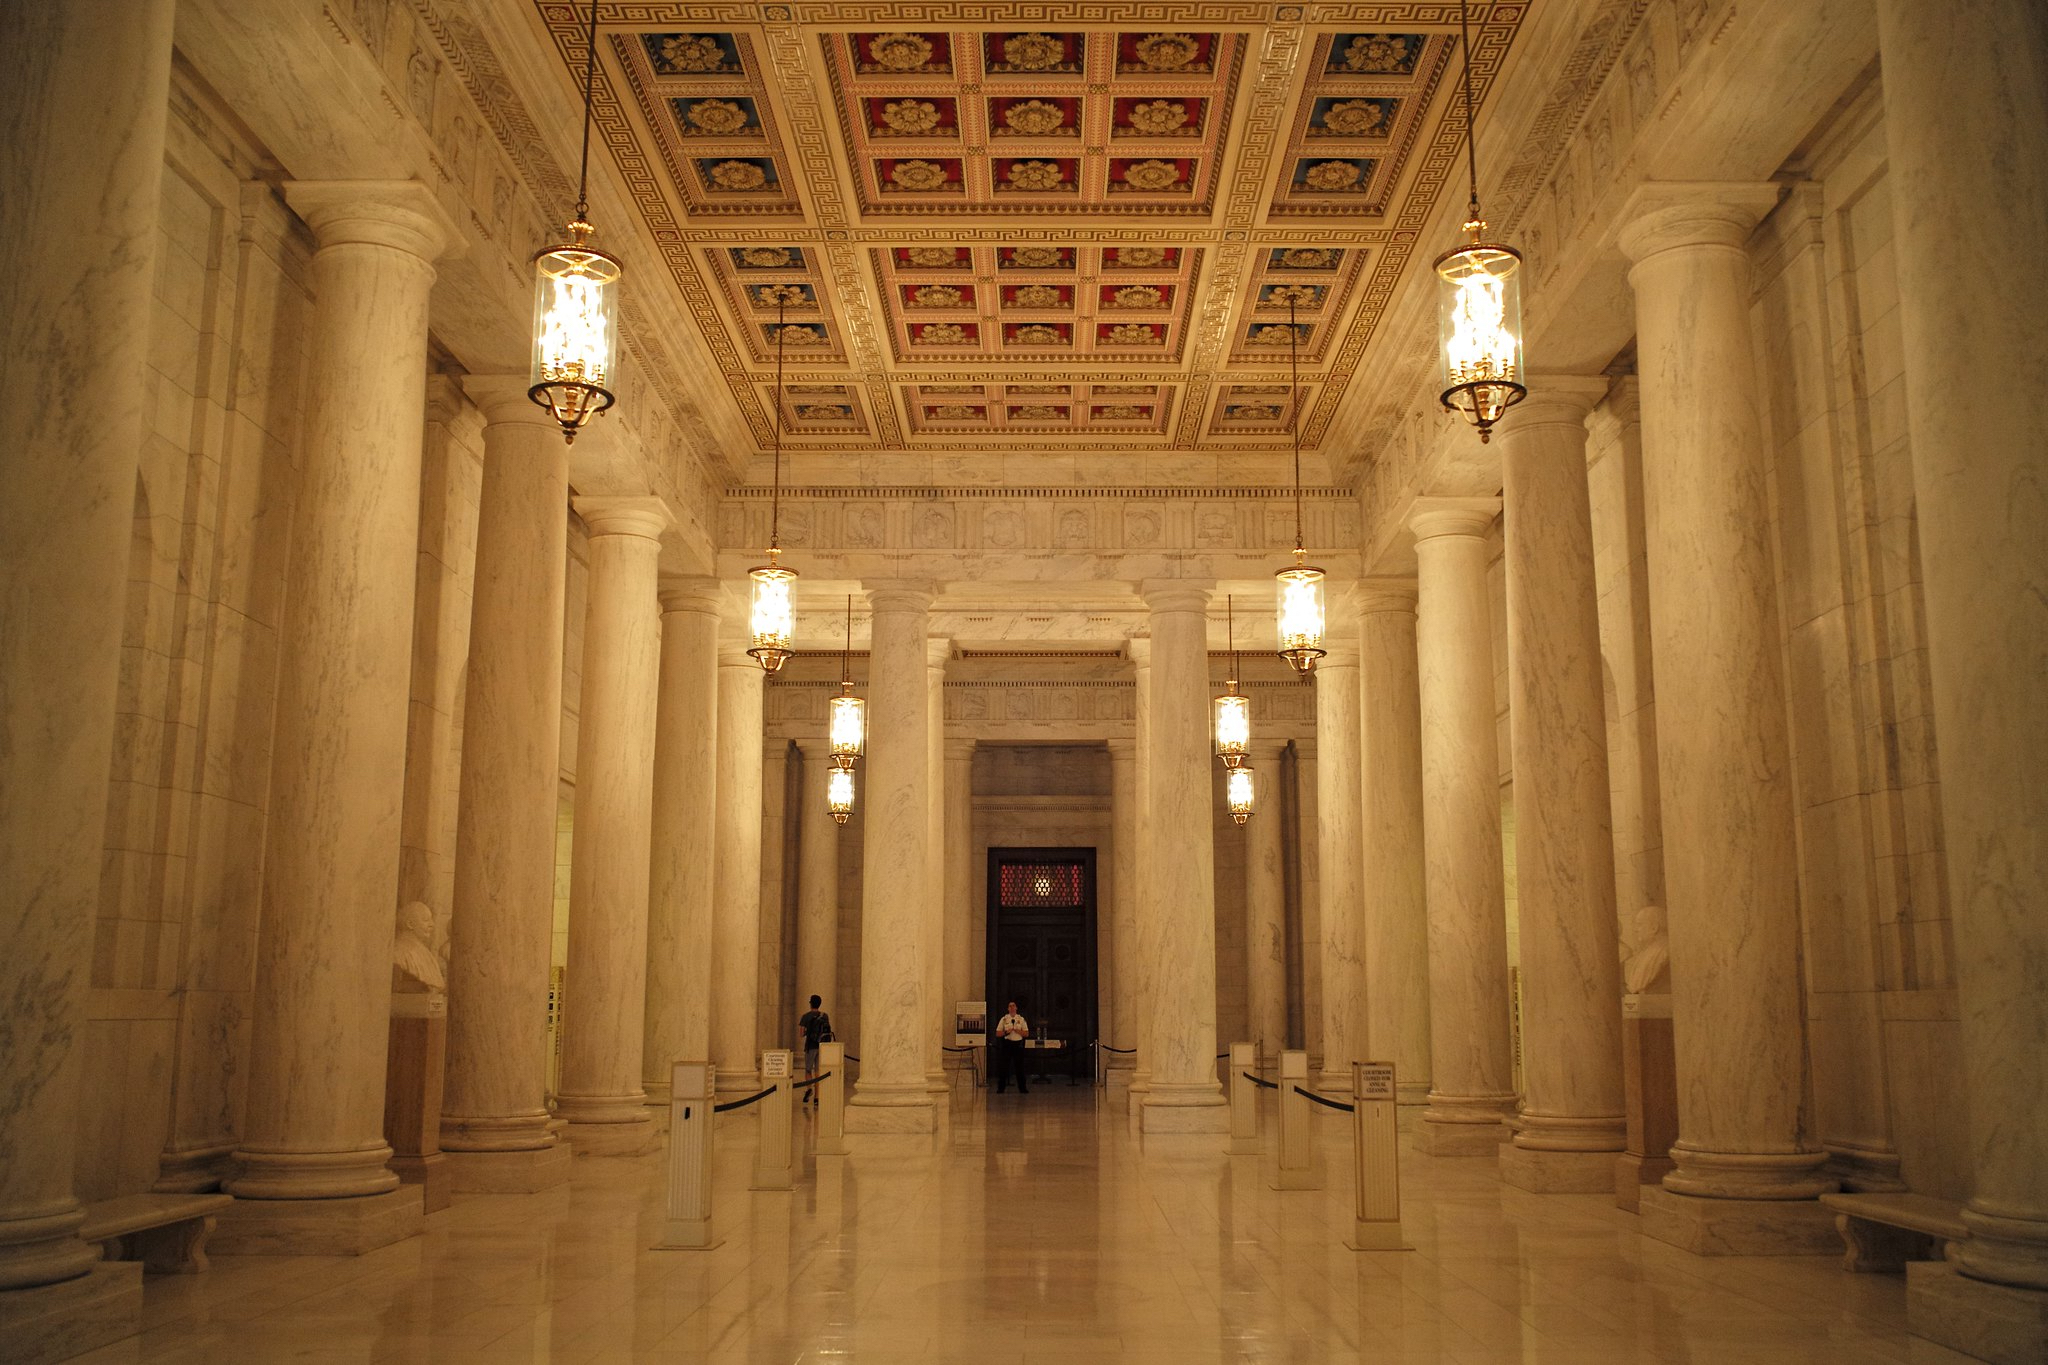 A long marble lobby with hanging lamps and marble columns. A guard waiting by a door at the end of the hall.